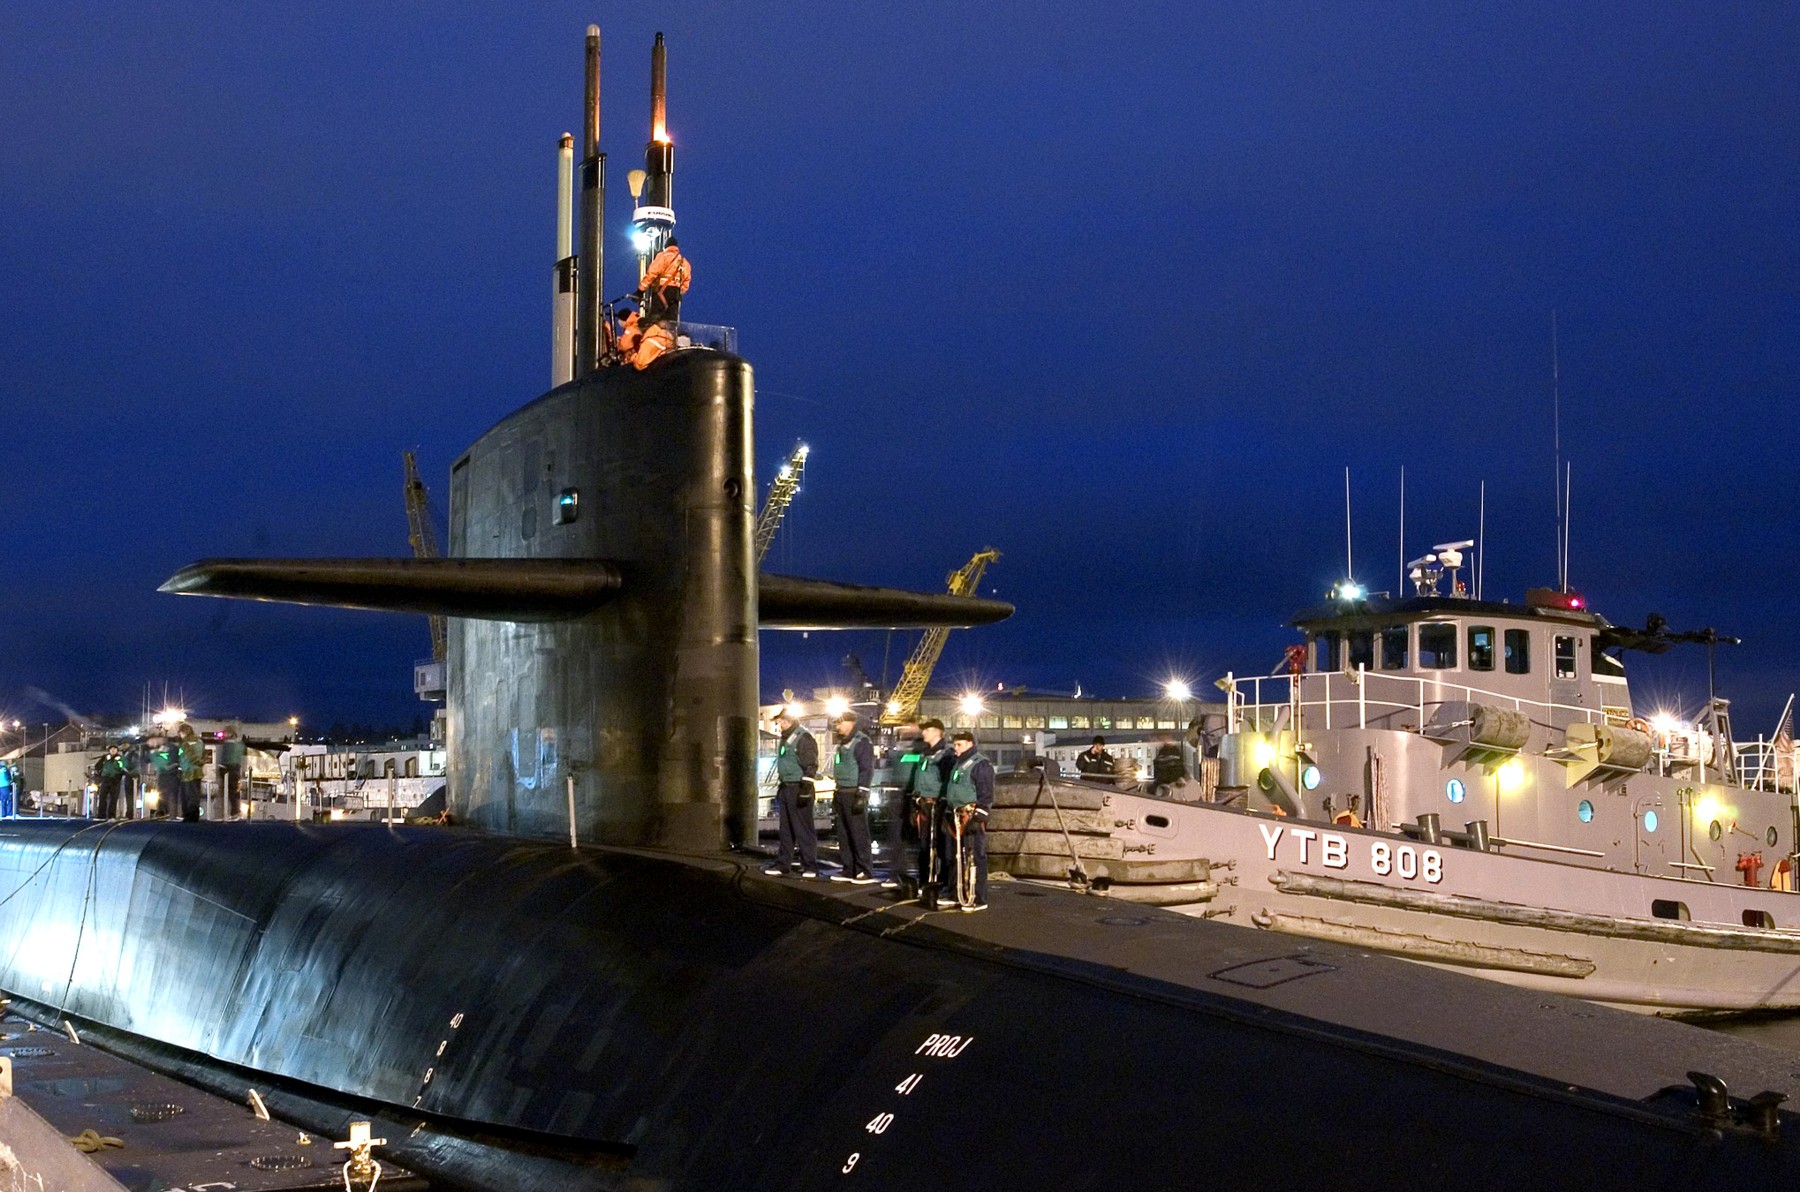 ssgn-726 uss ohio guided missile submarine us navy 2005 52 puget sound naval shipyard bremerton